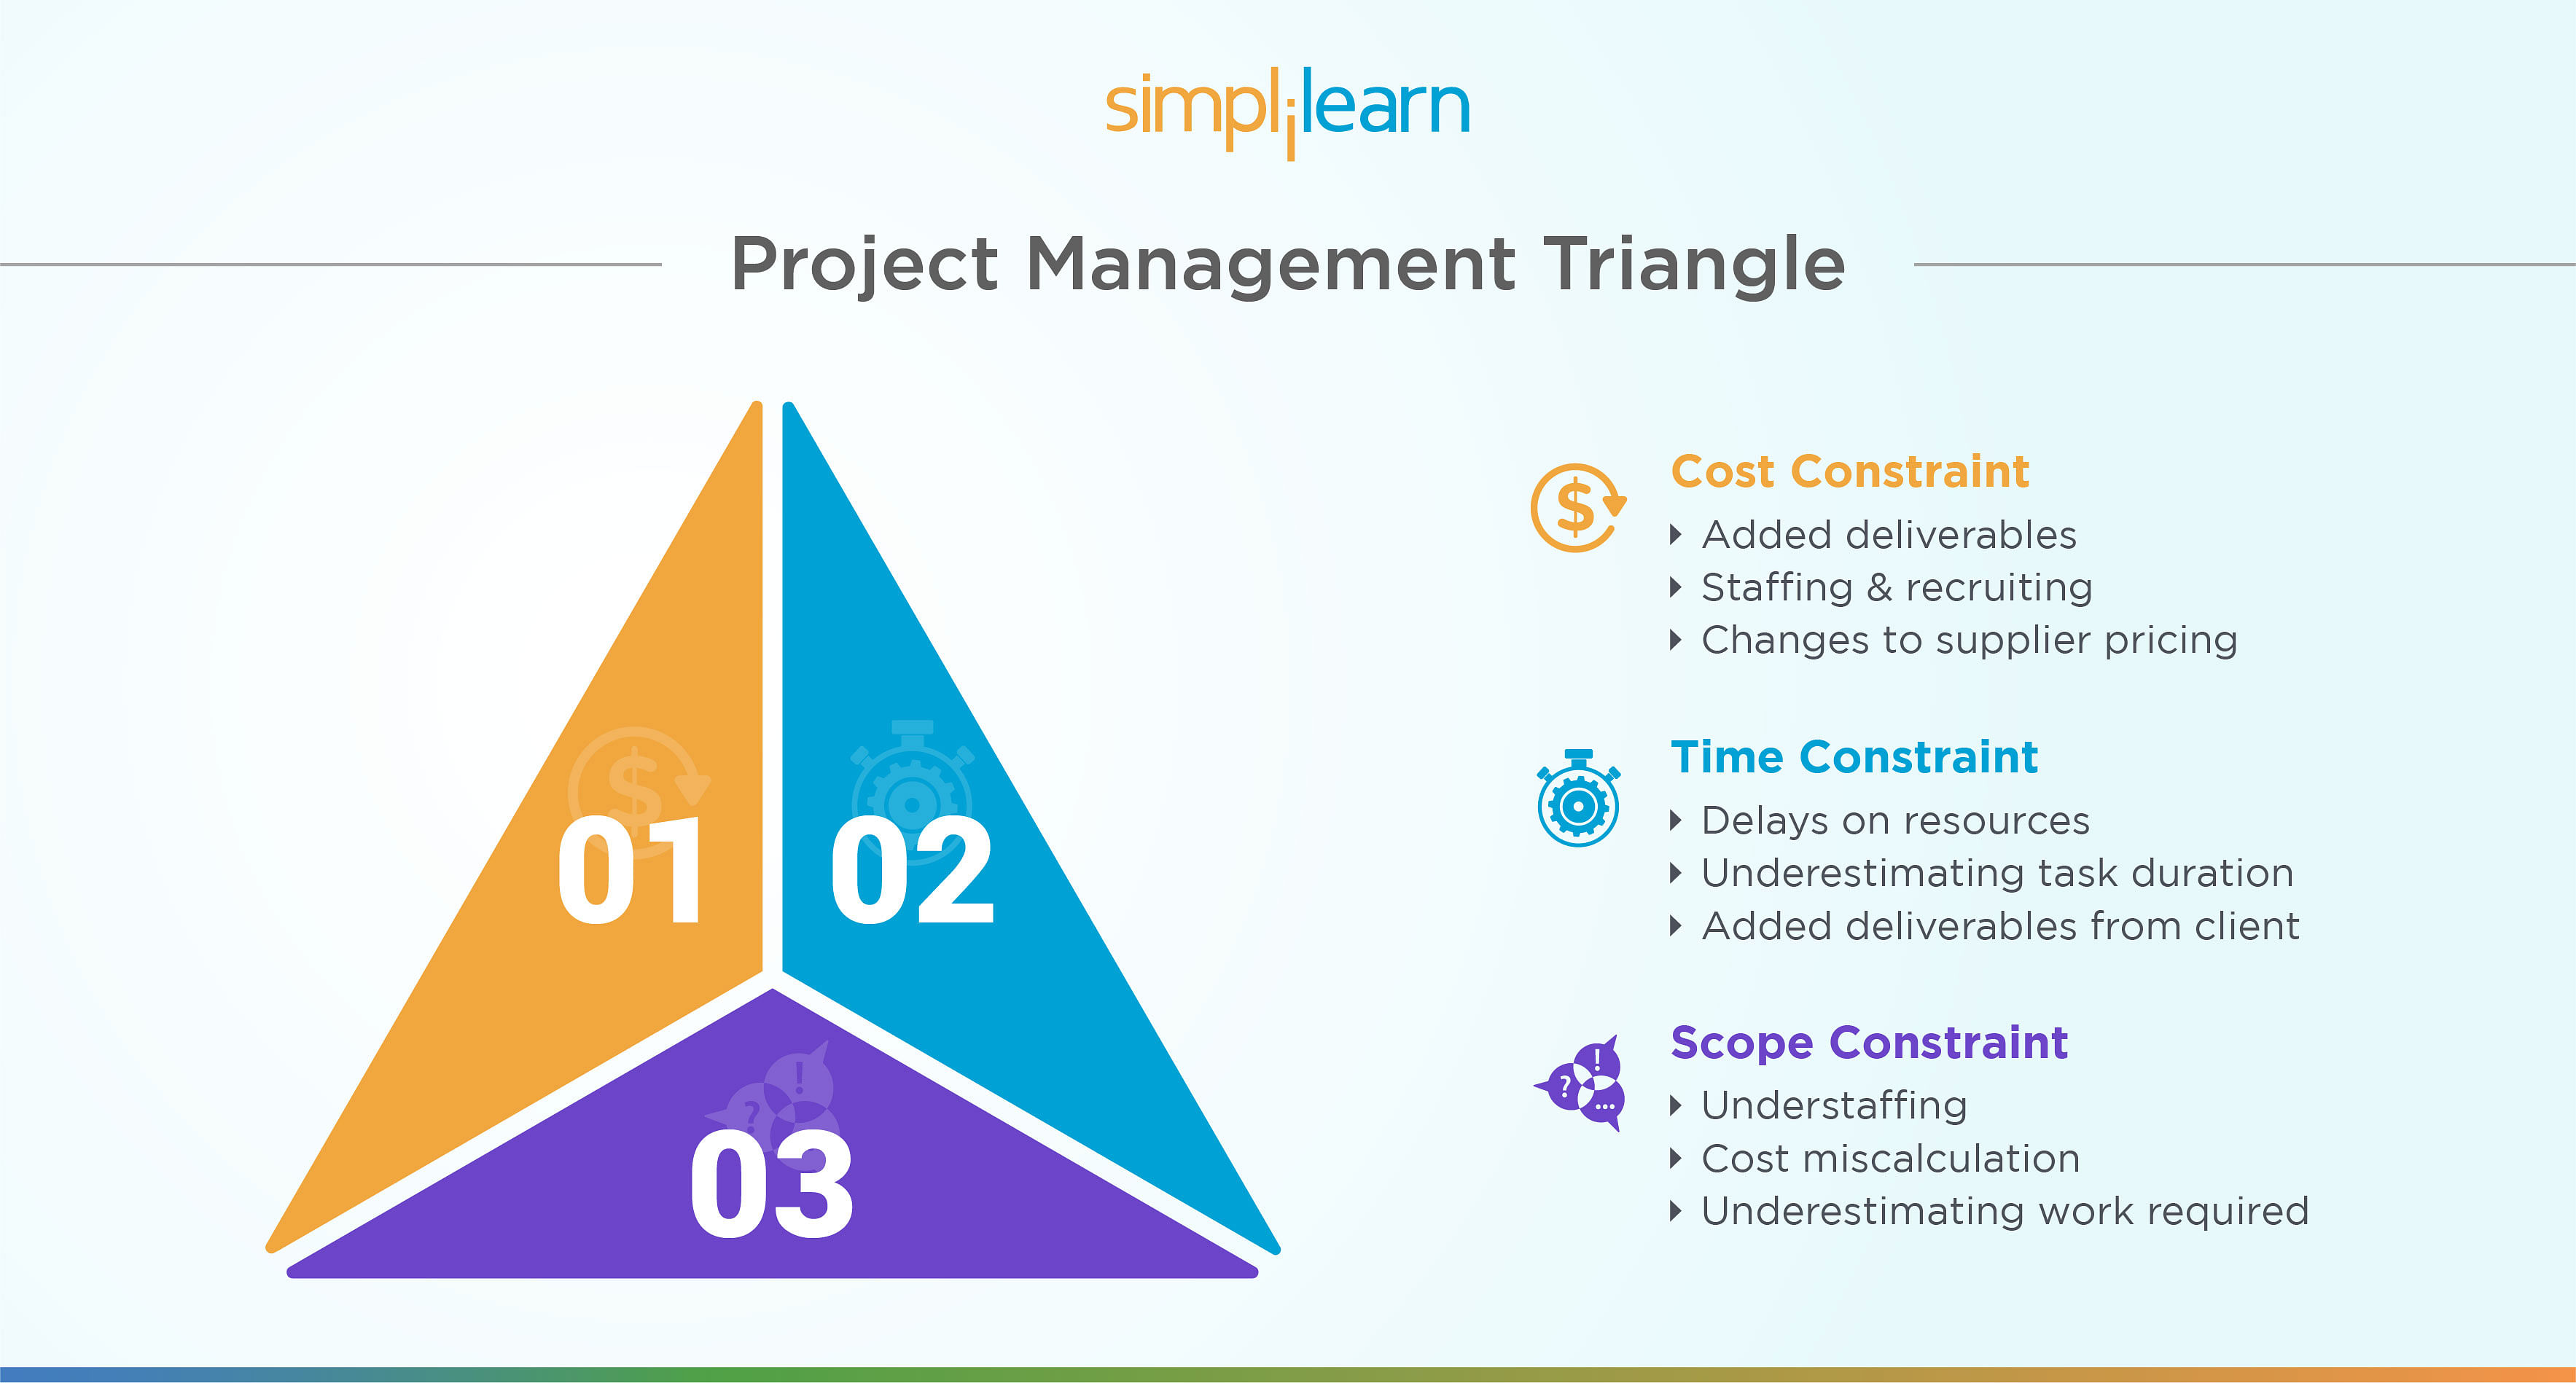 download free project triangle strategy